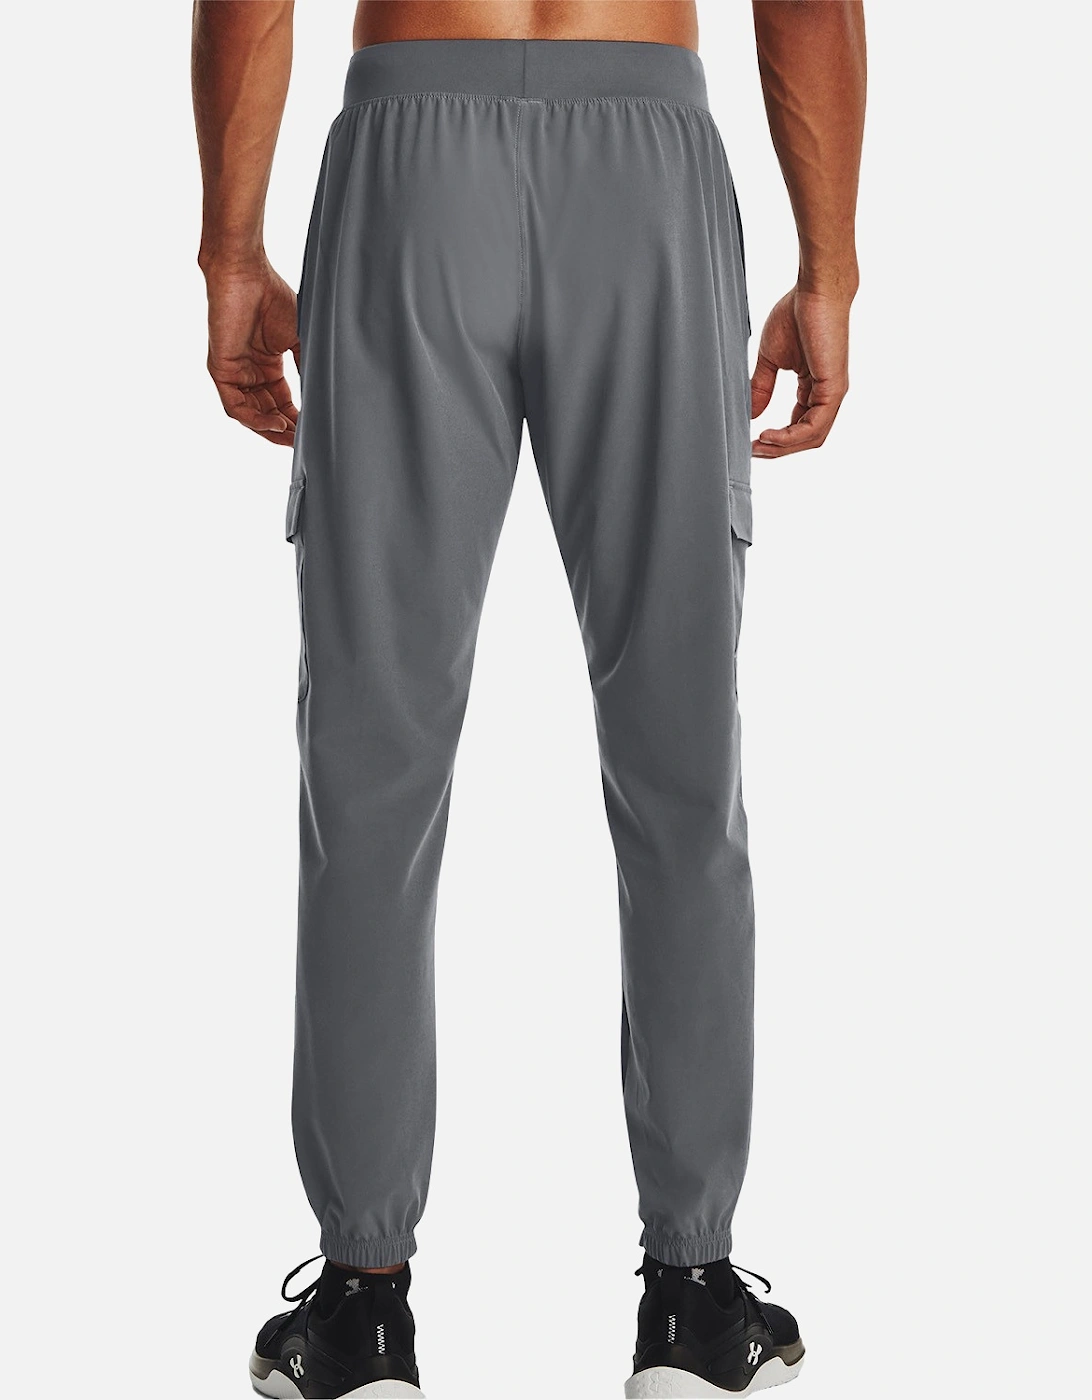 Mens Stretch Woven Cargo Pants (Grey)